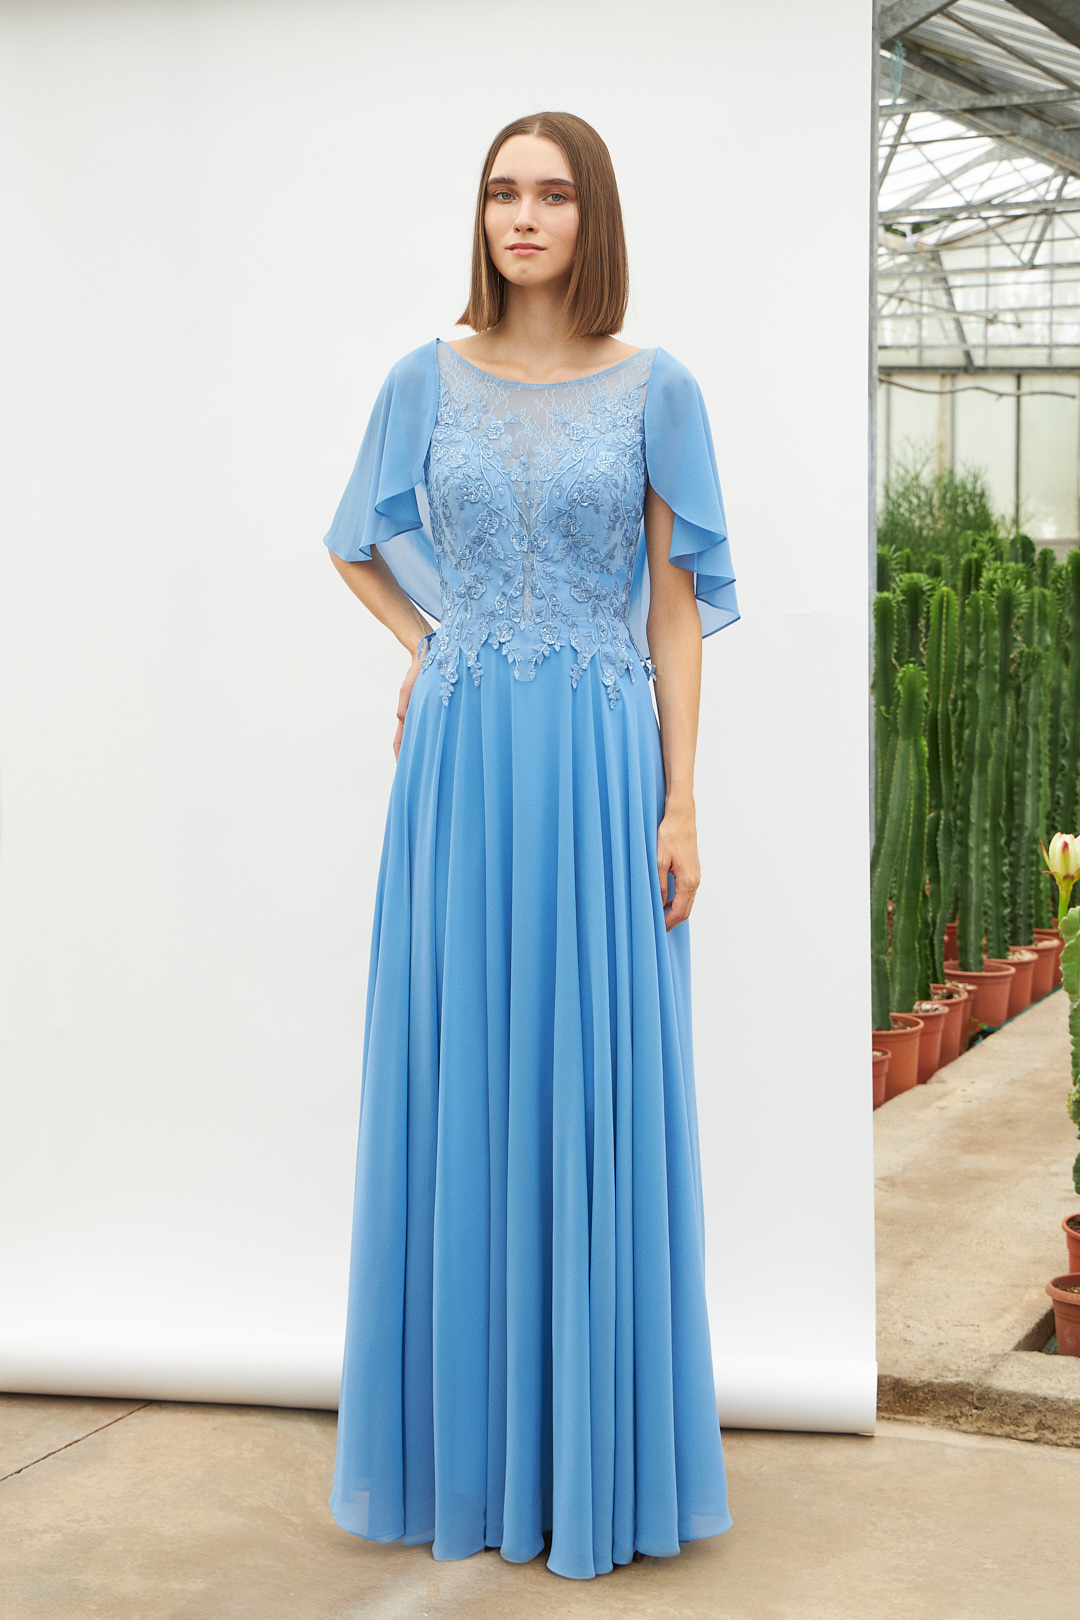 Classic Dresses / Long classic chiffon dress with lace and beaded top for the mother of the bride